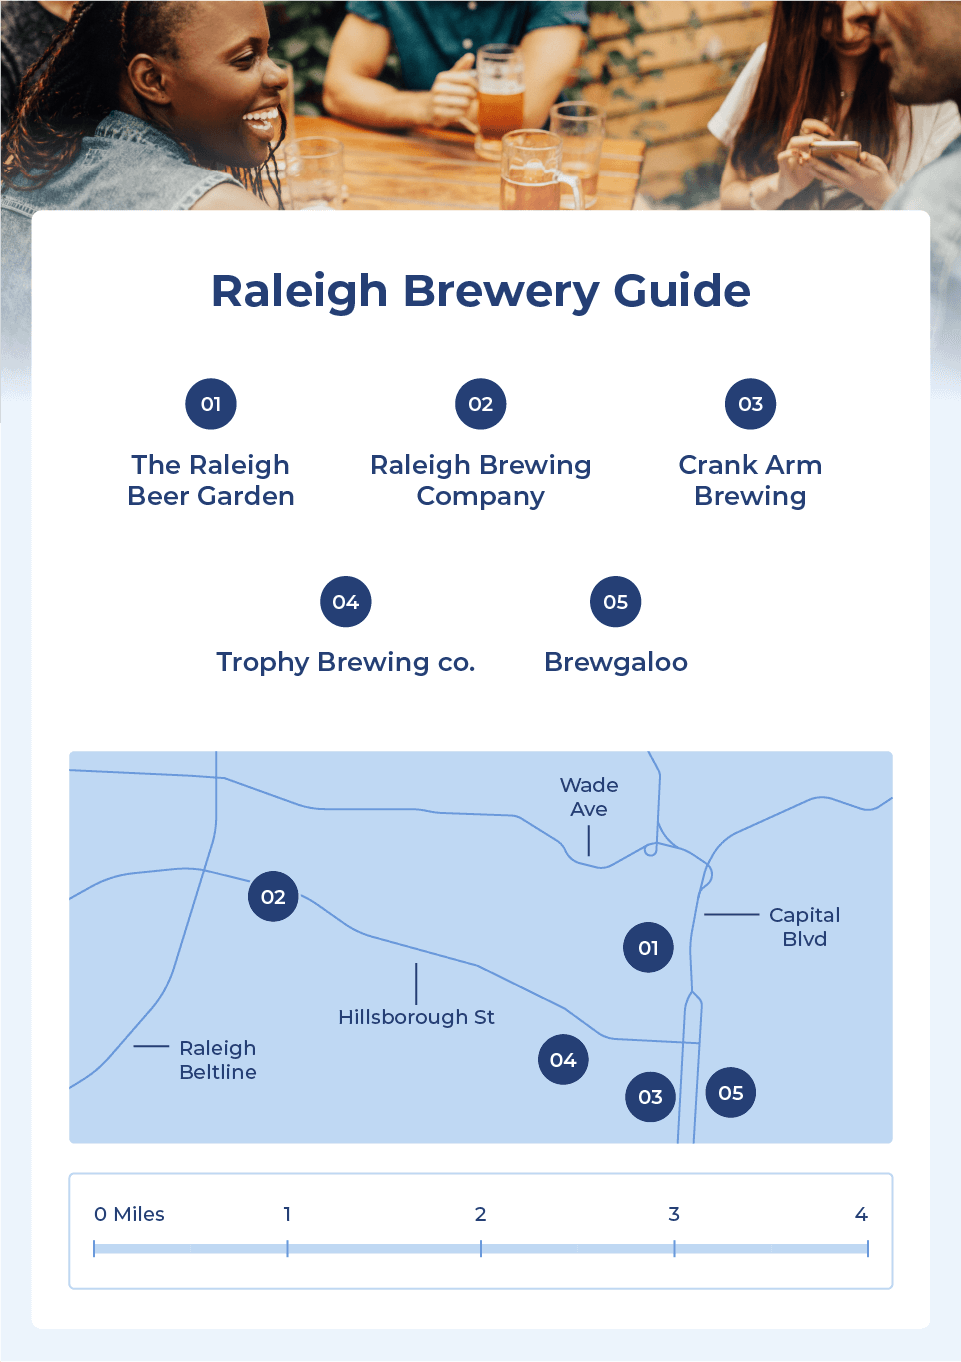 Breweries to visit in Raleigh, North Carolina are The Raleigh Beer Garden, Raleigh Brewing Company, Crank Arm Brewing, Trophy Brewing Co., and Brewgaloo. 